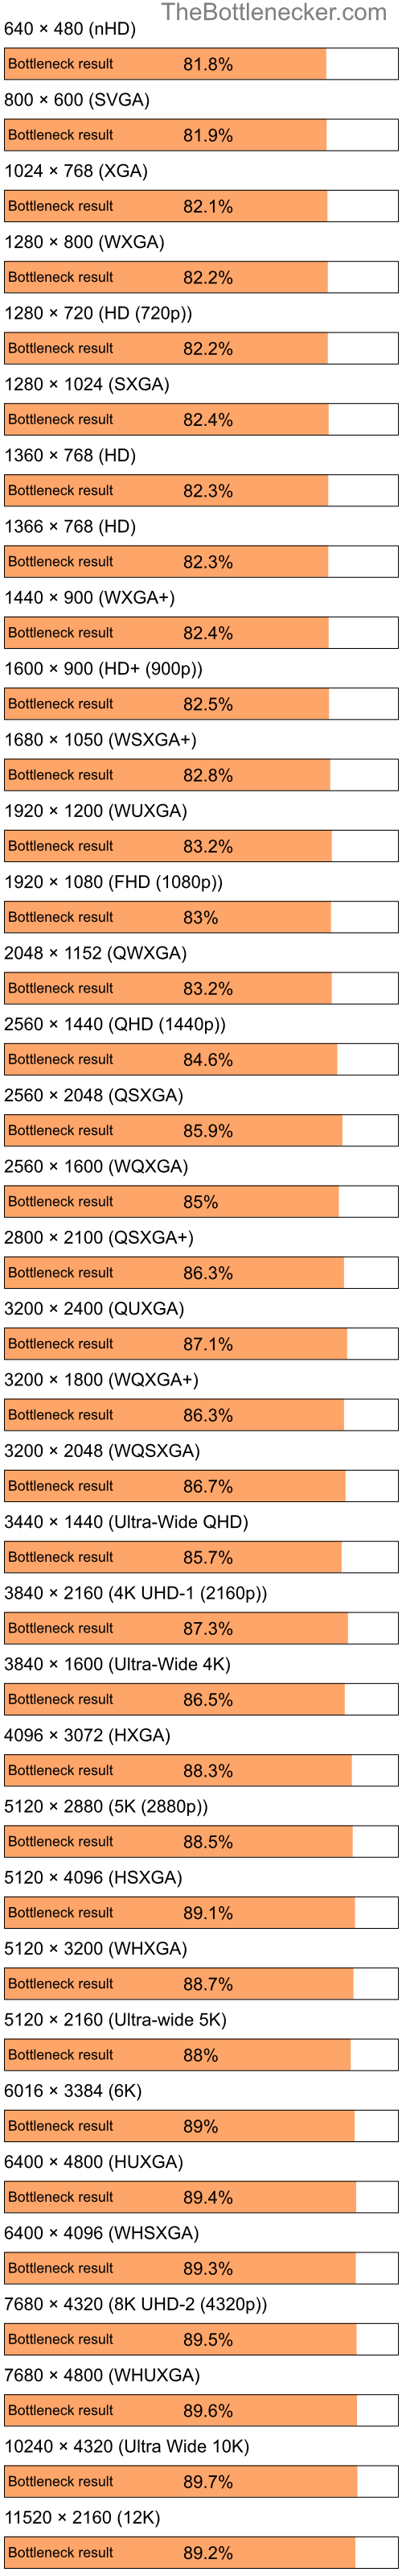 Bottleneck results by resolution for Intel Celeron M 420 and AMD Mobility Radeon 9700 in Graphic Card Intense Tasks